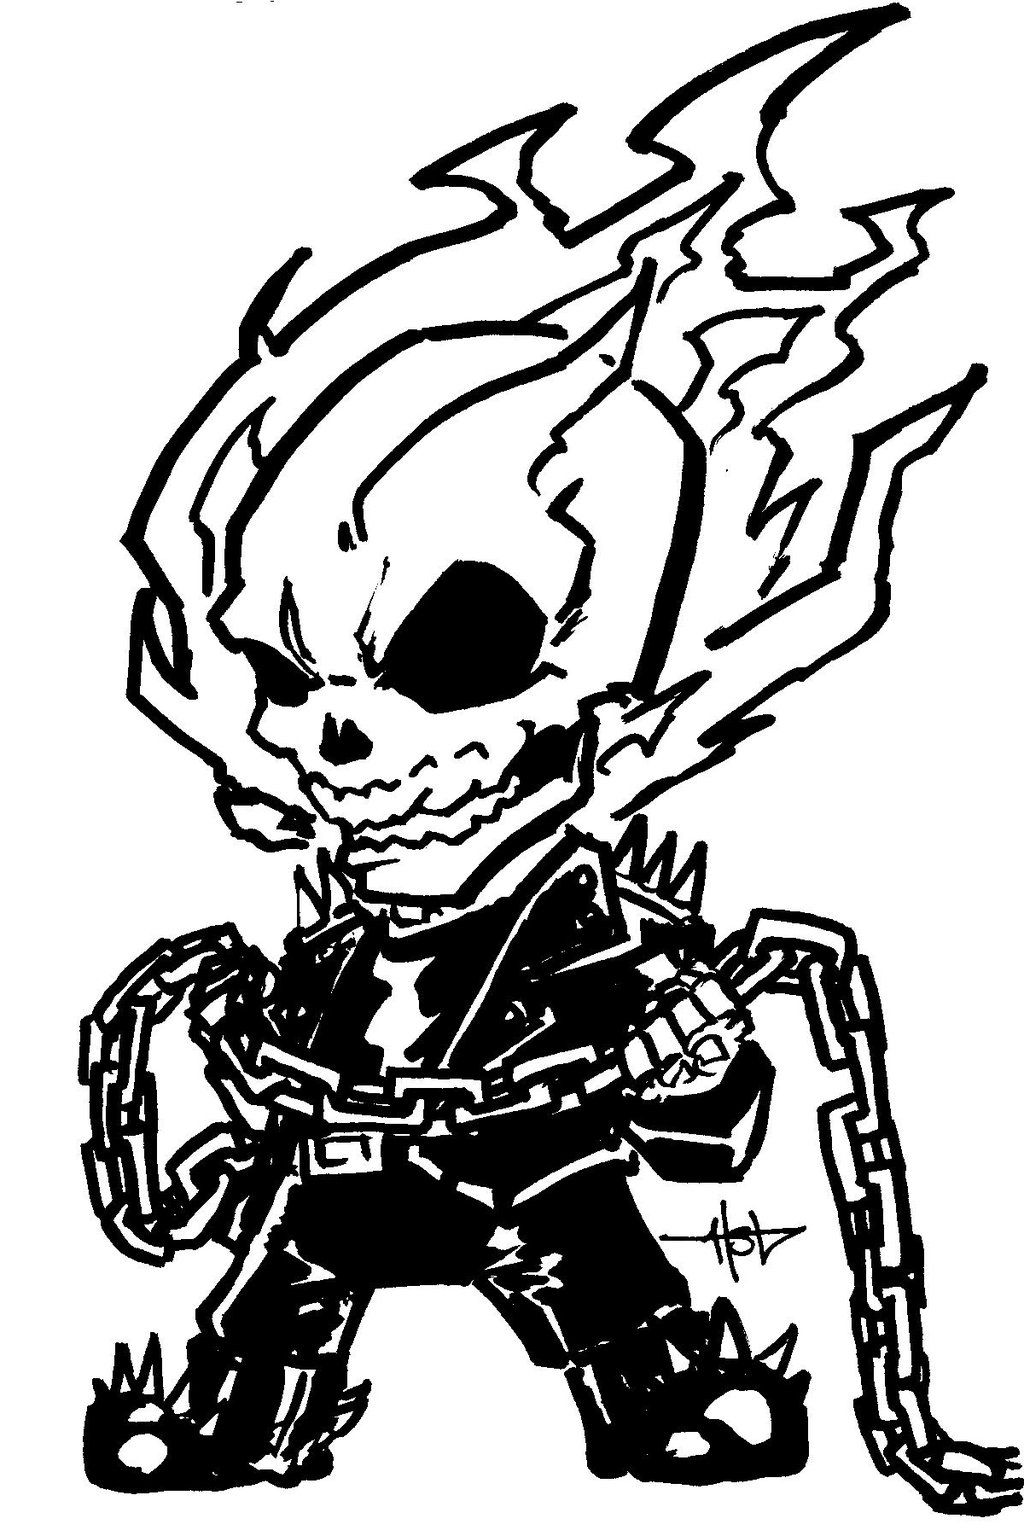 Ghost Rider Coloring Pages To Print Ghost Rider Vector At Getdrawings Free For Personal Use Ghost